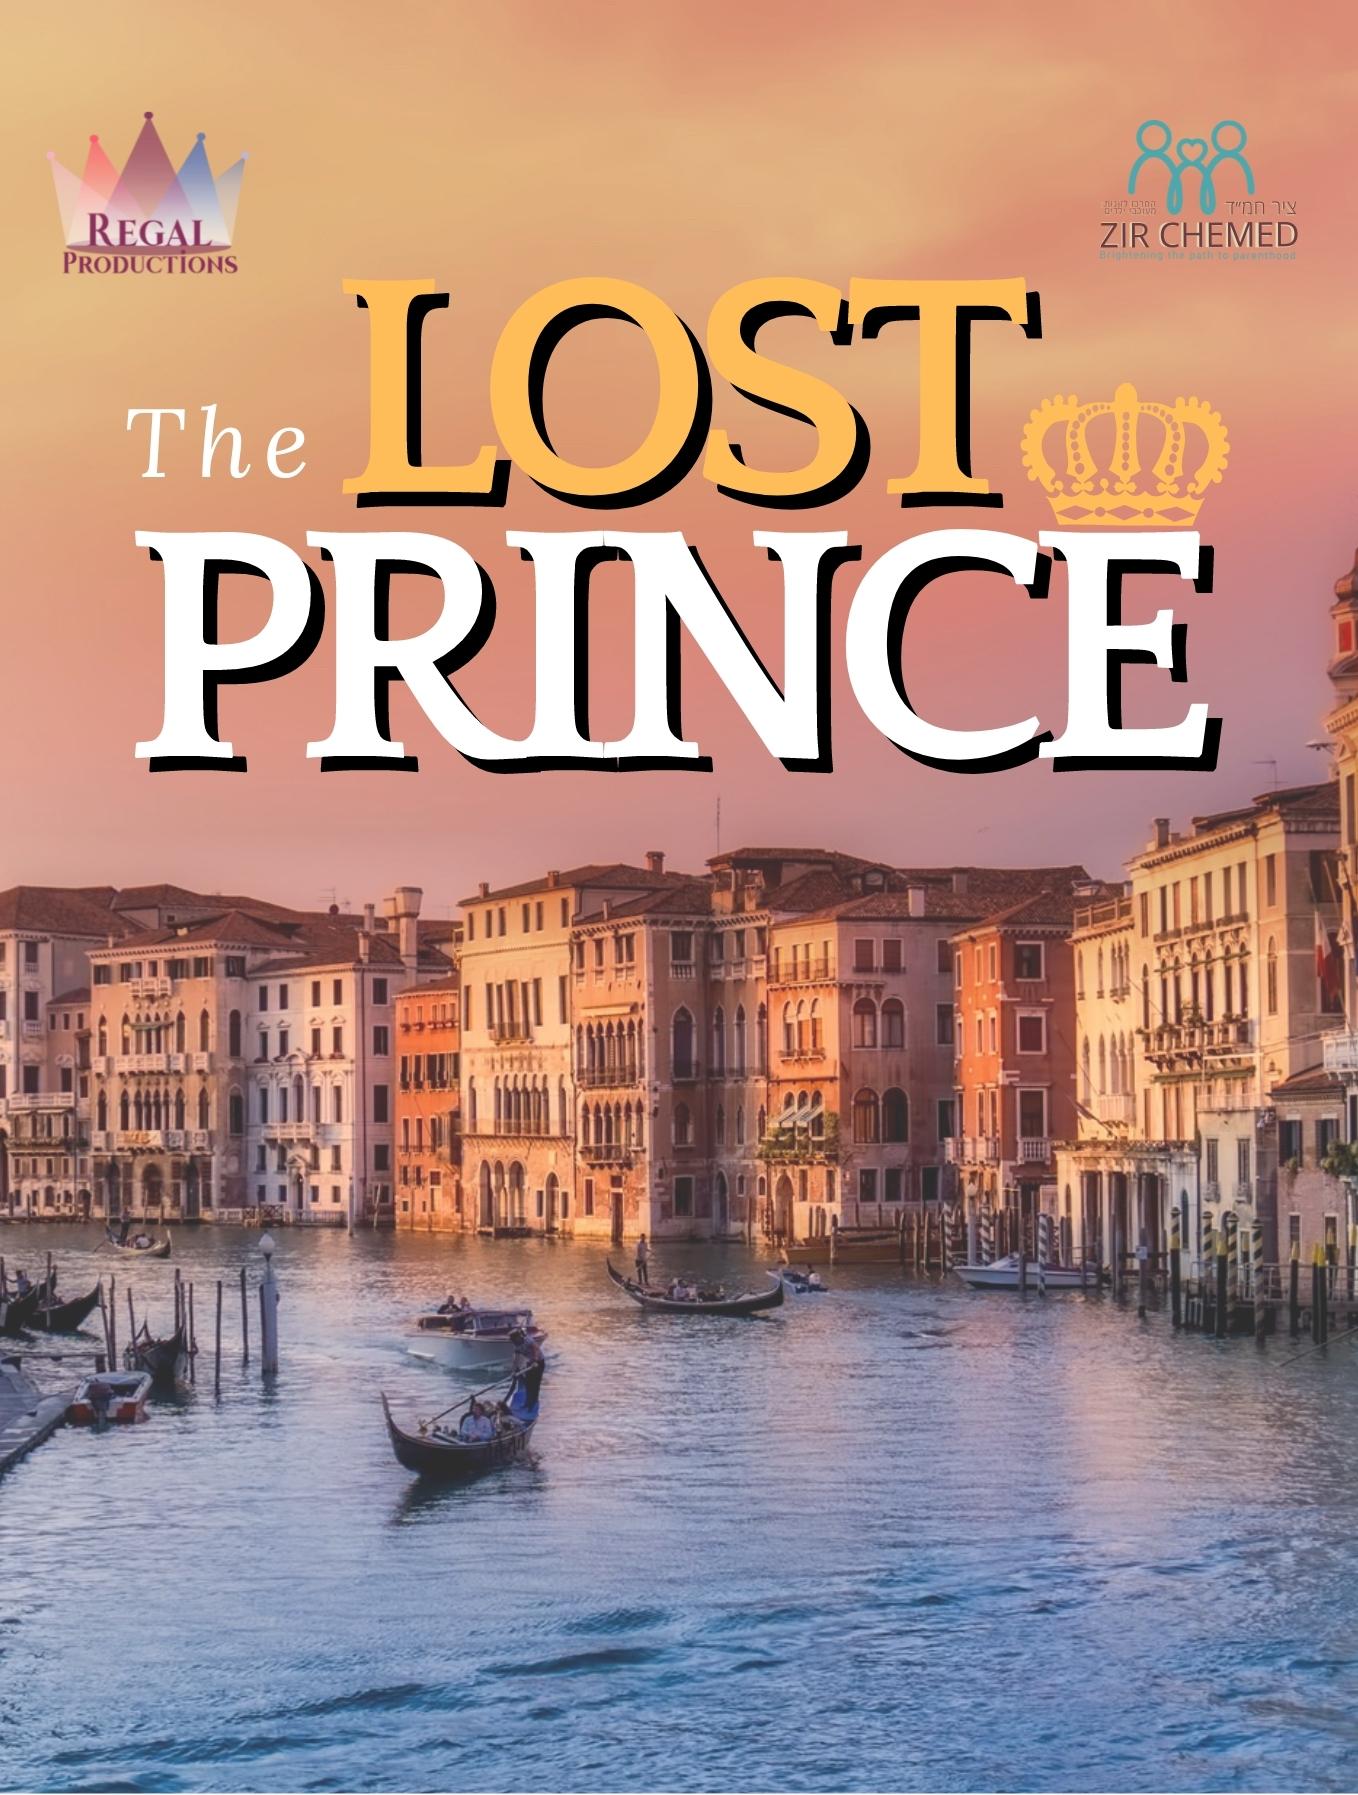 The Lost Prince picture